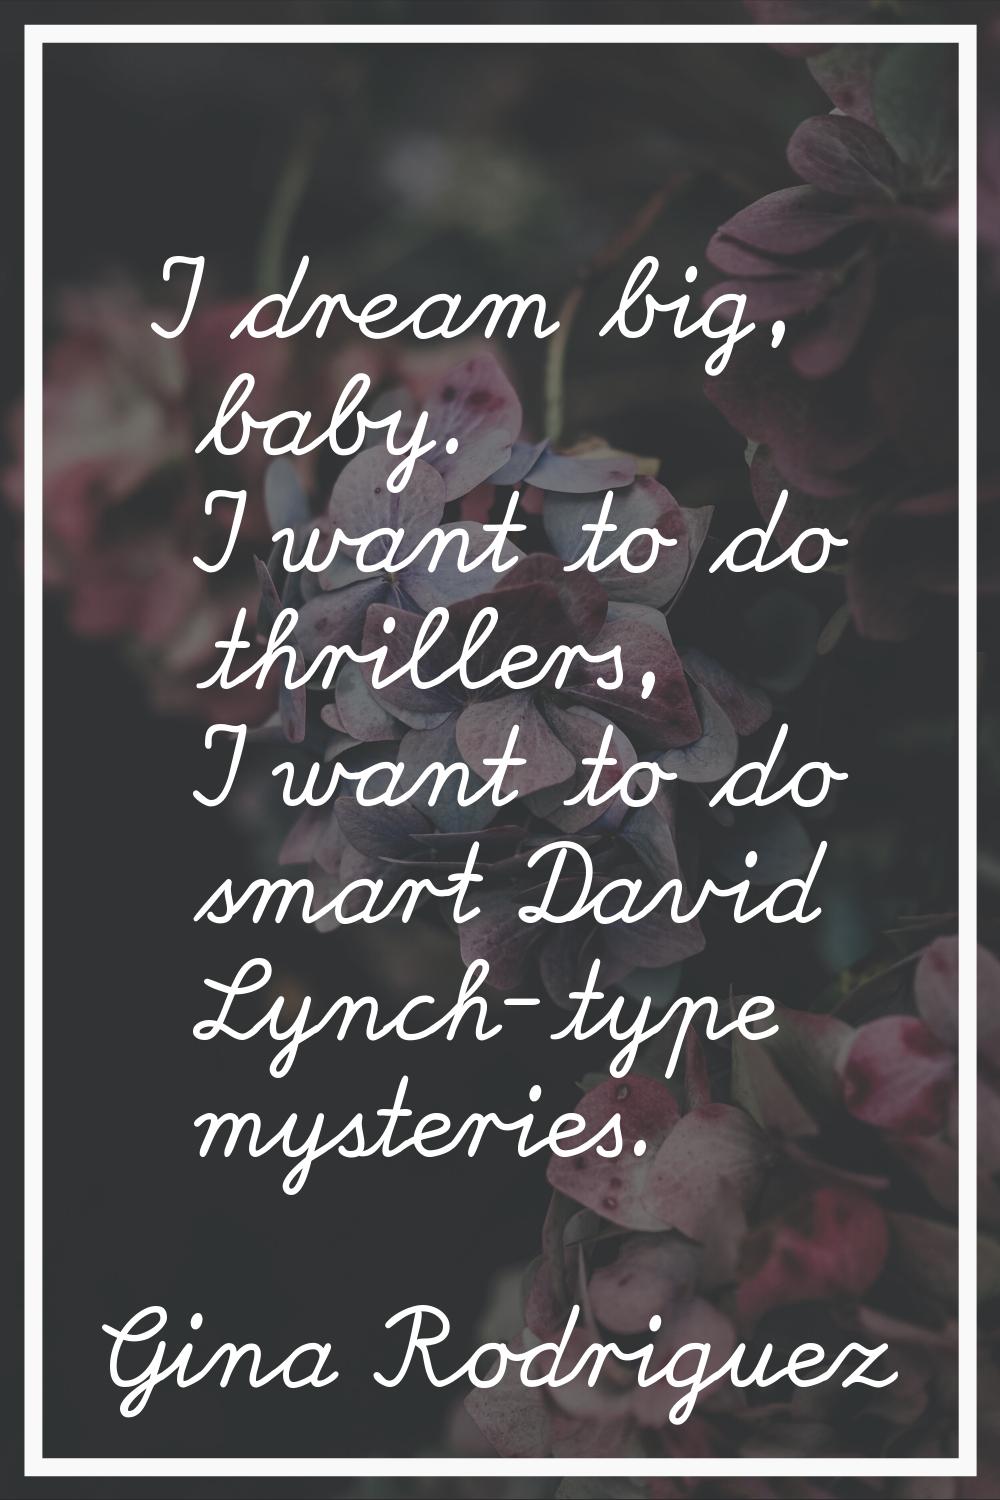 I dream big, baby. I want to do thrillers, I want to do smart David Lynch-type mysteries.